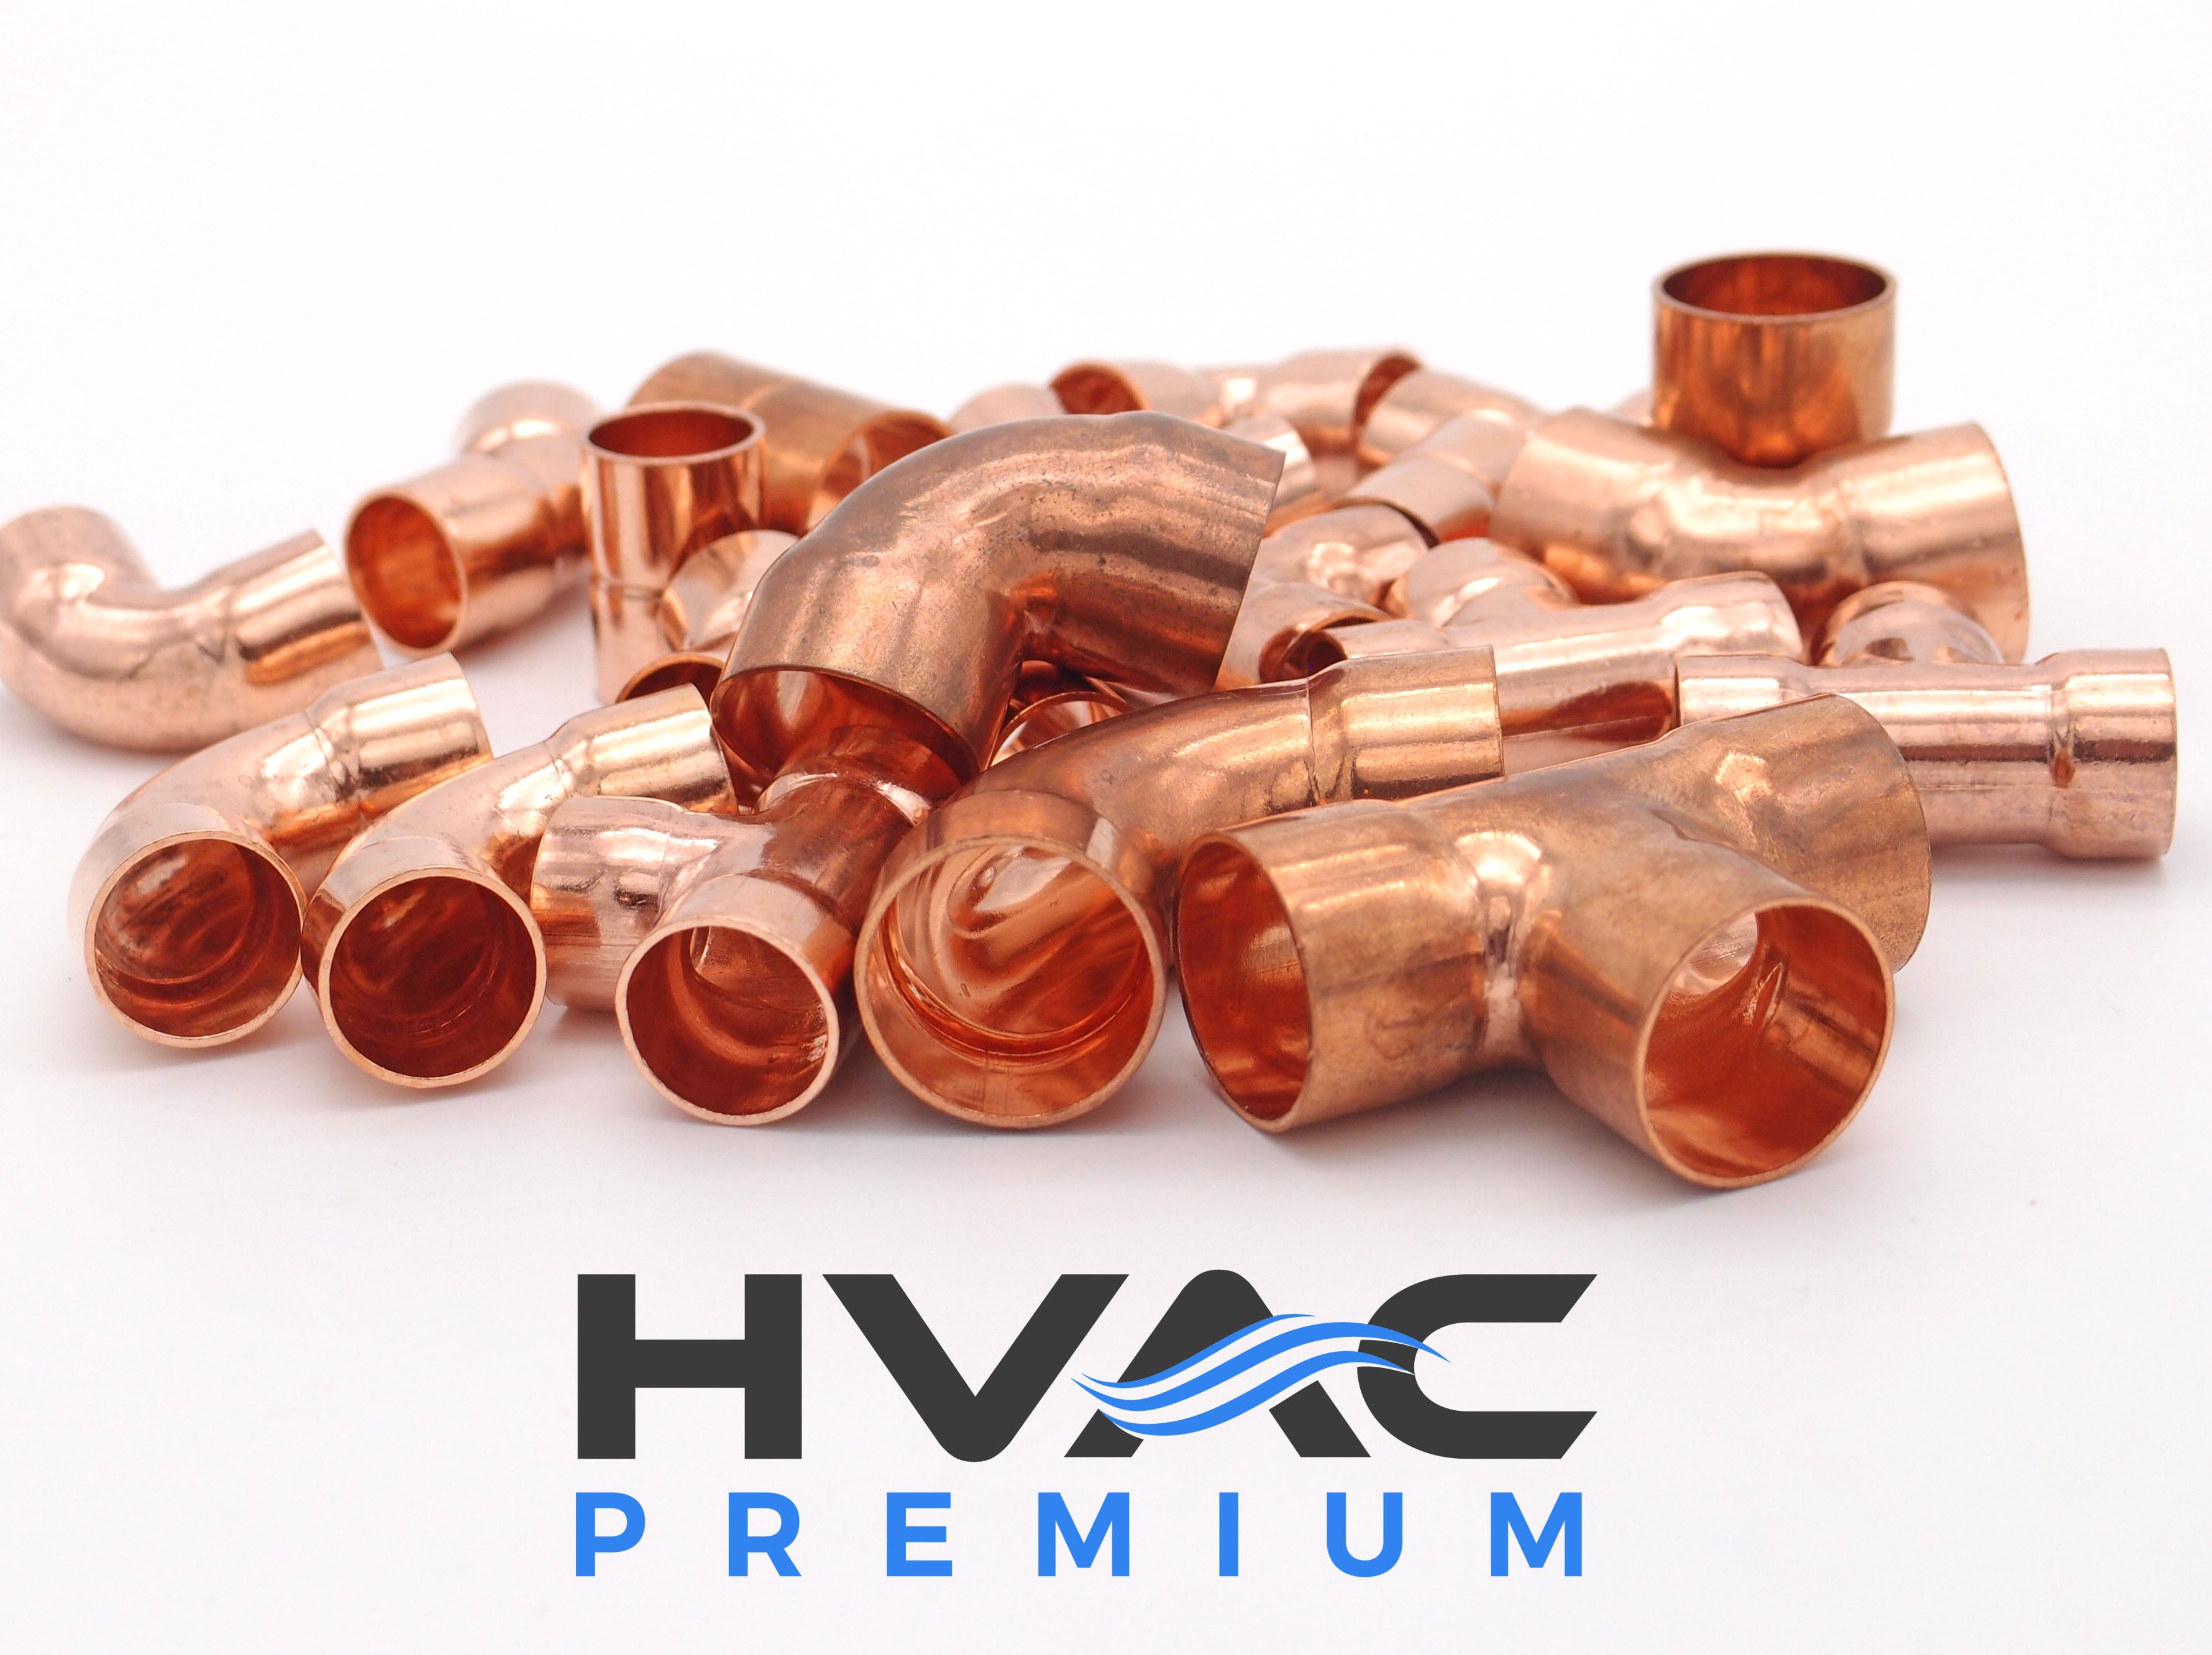 Copper Fitting 1-1/8 to 5/8 (HVAC Dimensions) Reducer / Increaser Copper Coupling & HVAC – 1 to 1/2 (Plumbing Inner Dimensions) 99.9% Pure Copper - 5 Pack